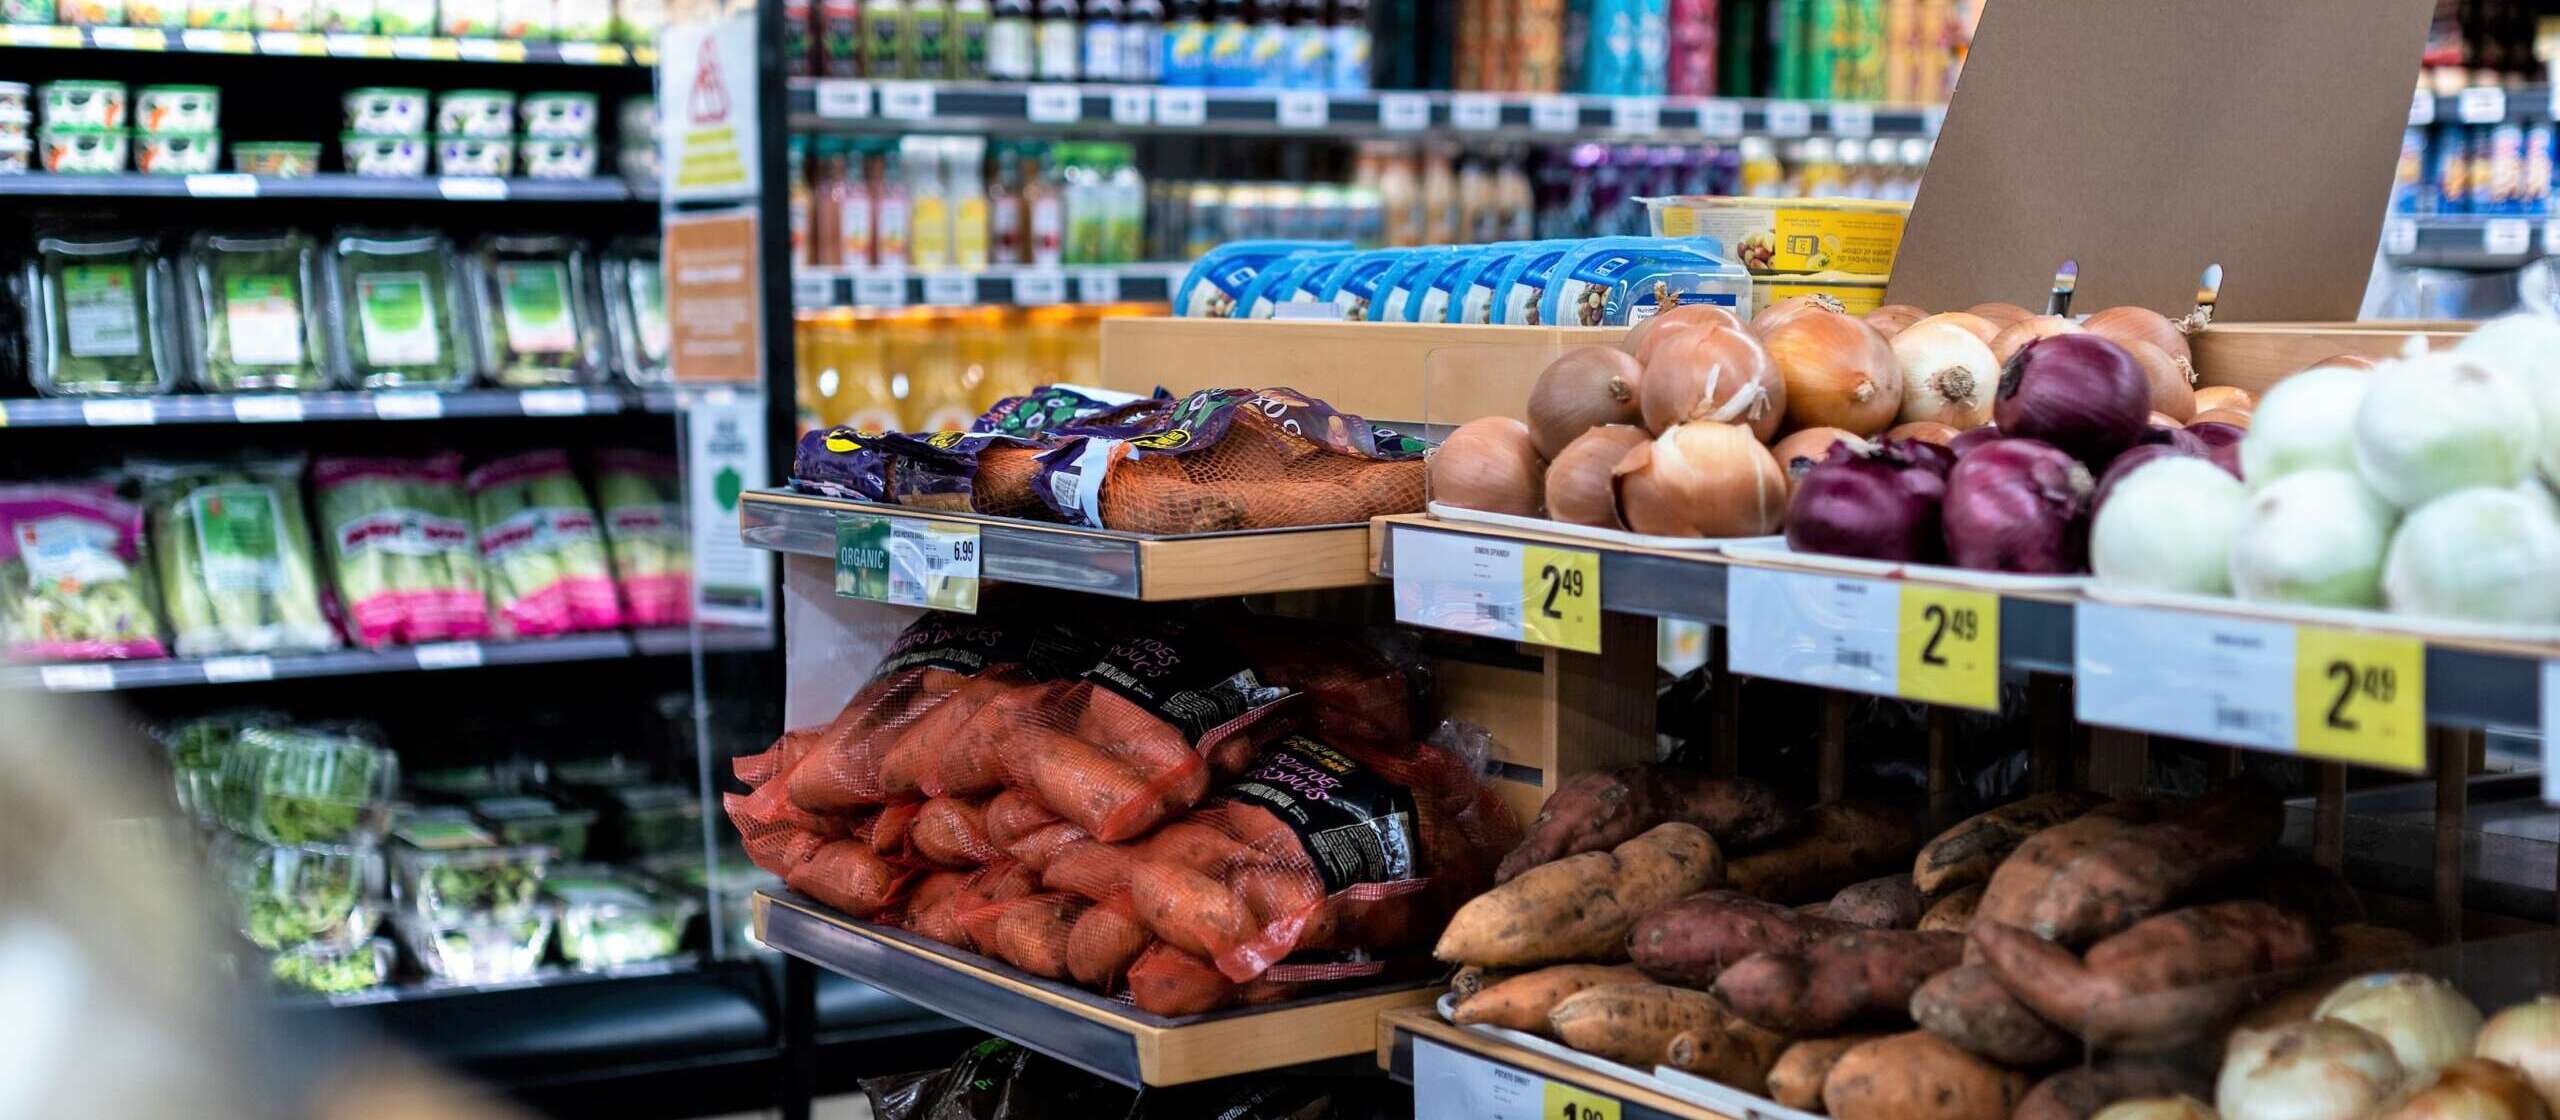 Food Price Report: Families to Pay Nearly $ 1,000 More for Food in 2022